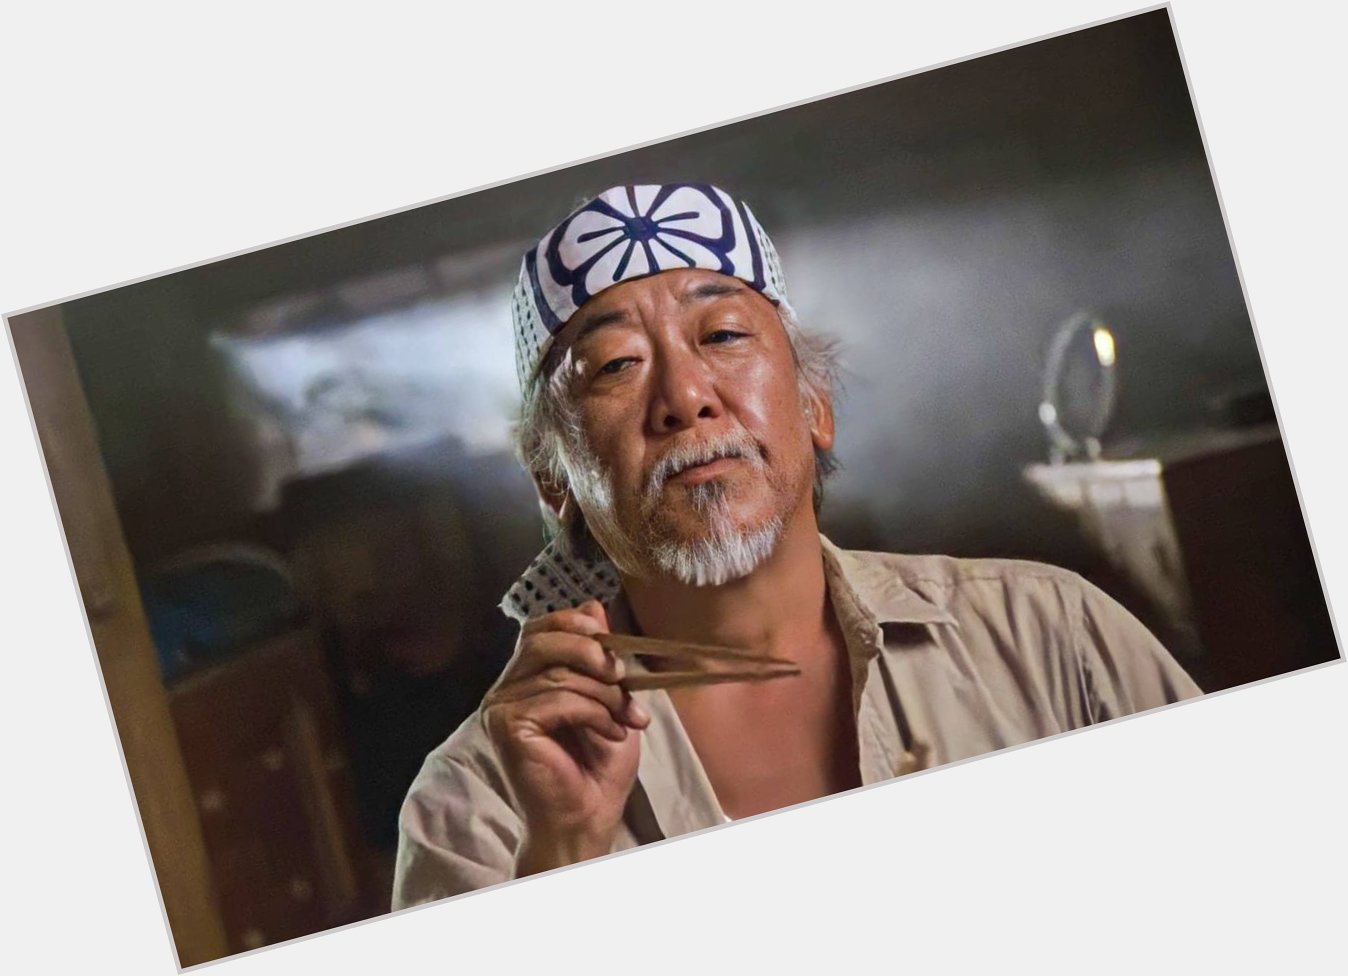 Happy Birthday to Pat Morita, Mr Miyagi himself, who would\ve turned 91 years old today. 

Rest in Peace. 